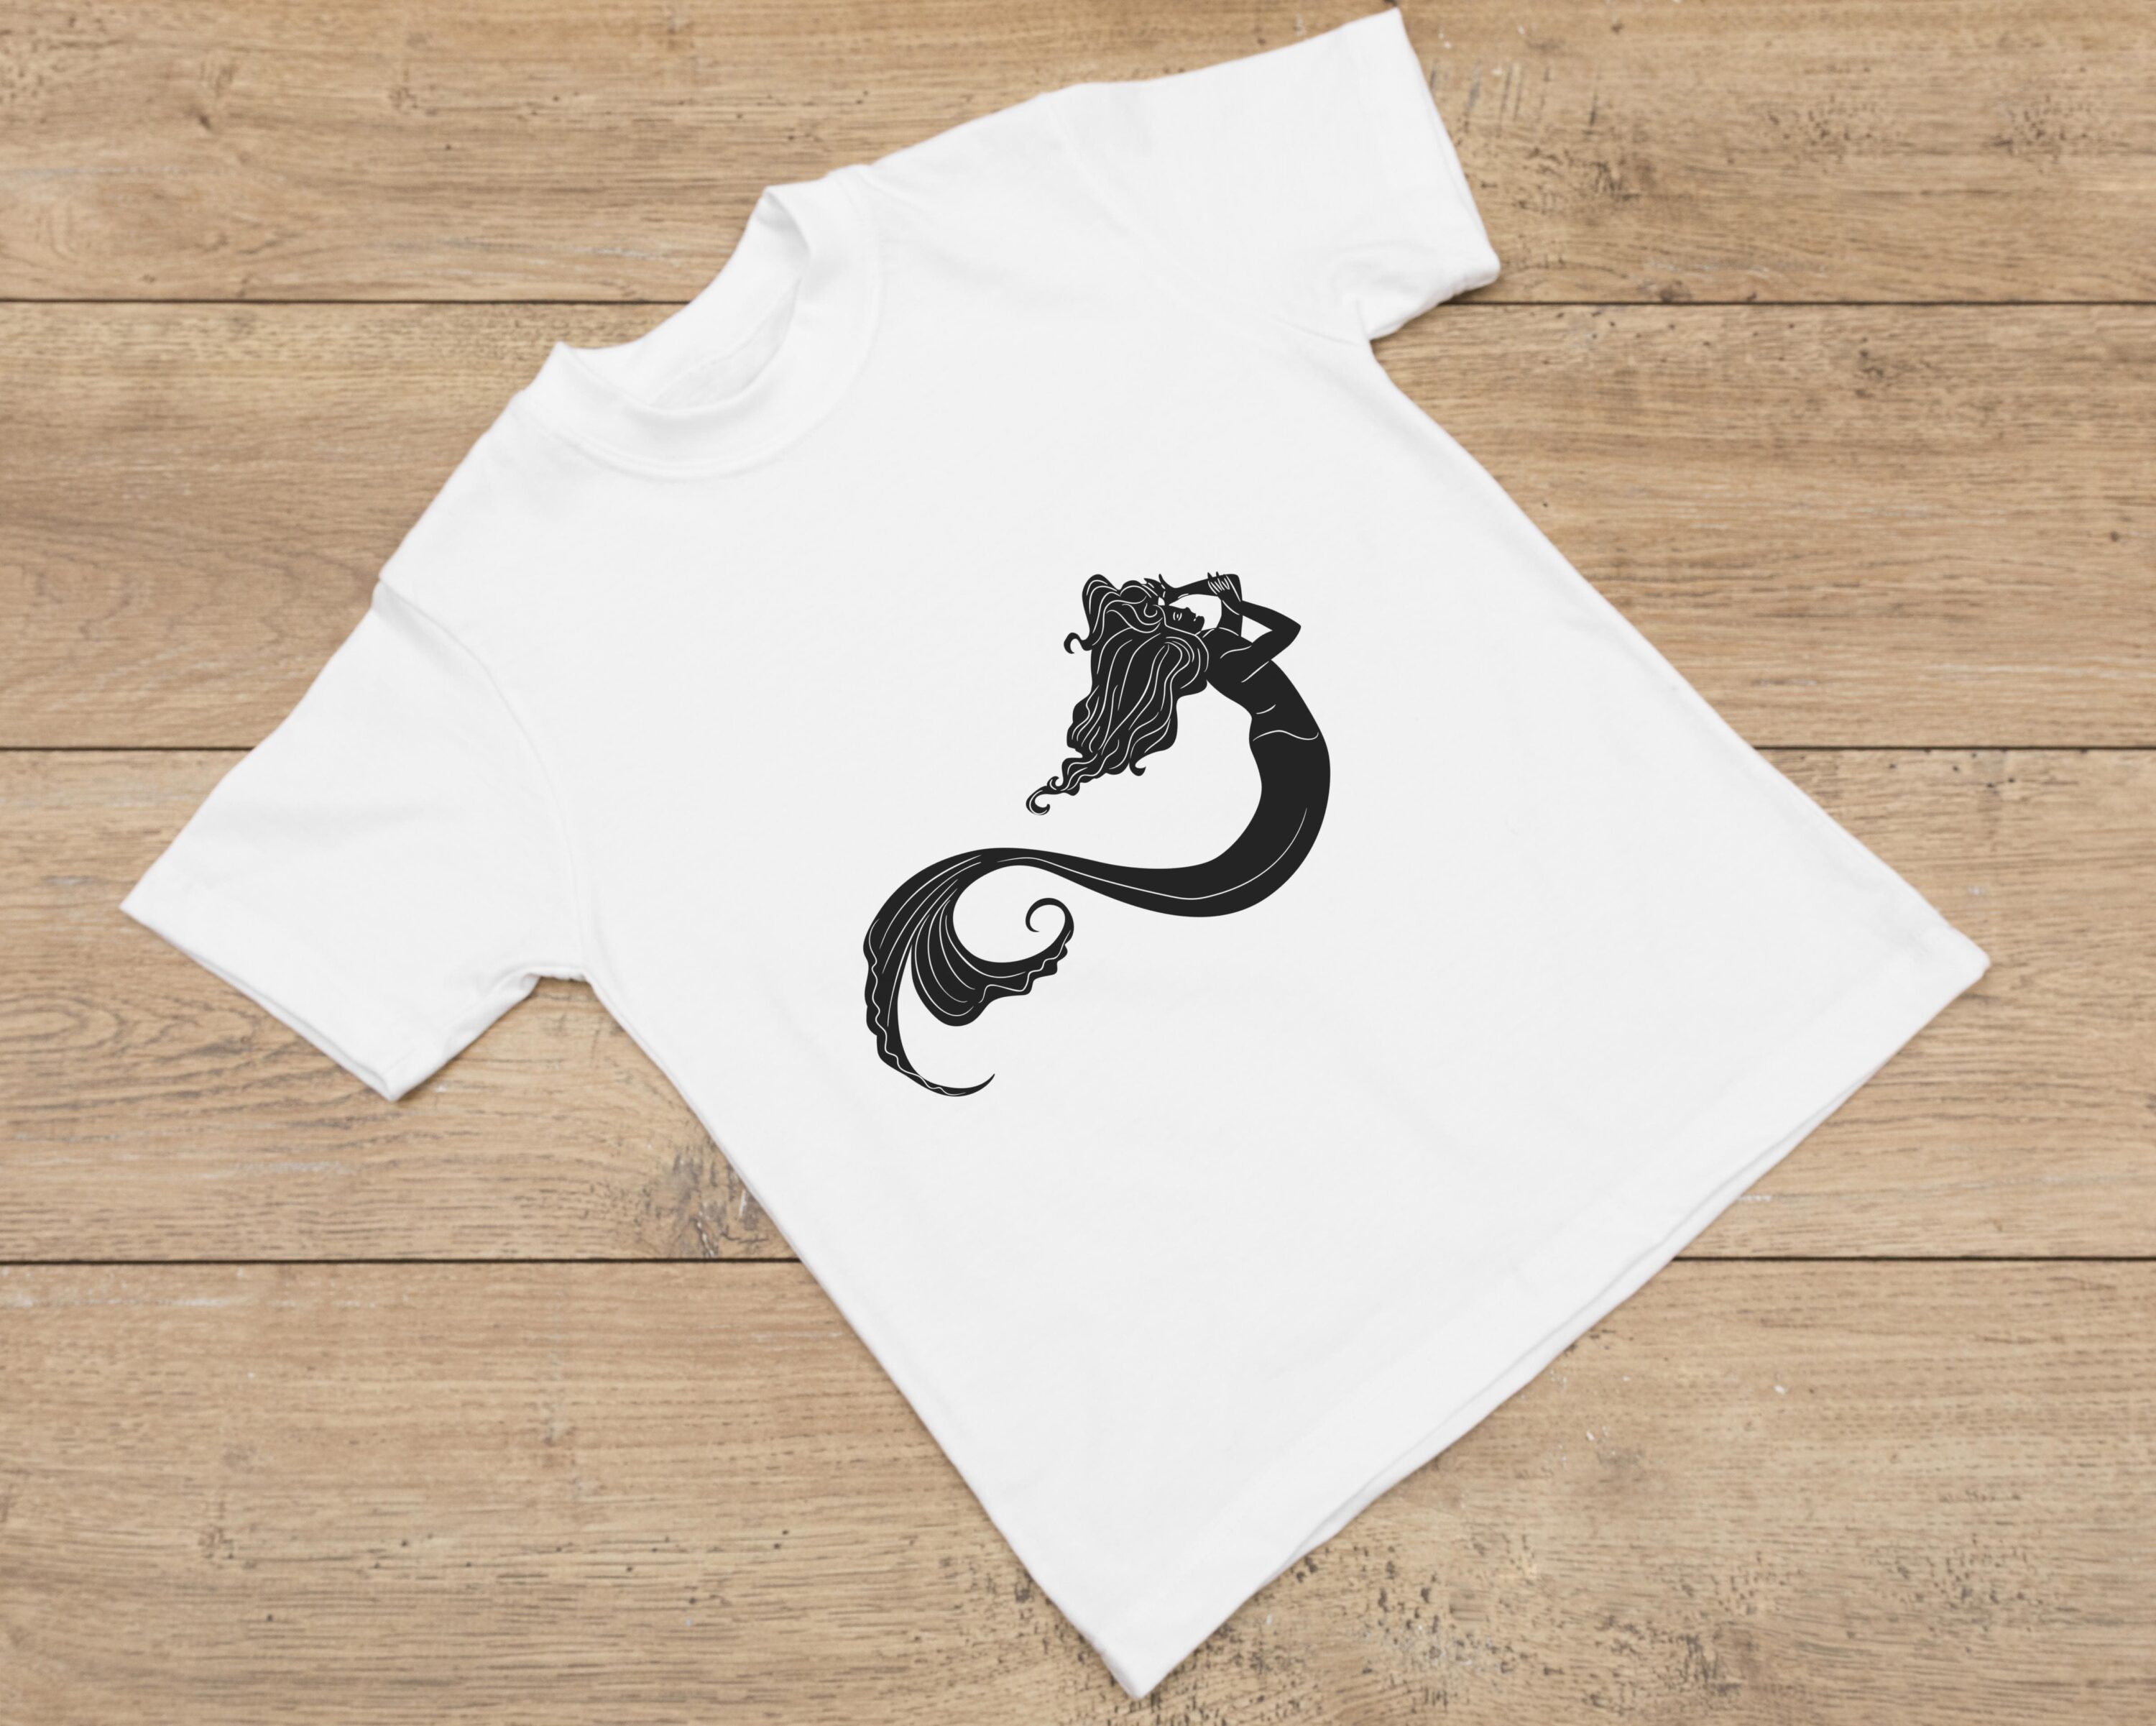 Big and beautiful mermaid for your white t-shirt.